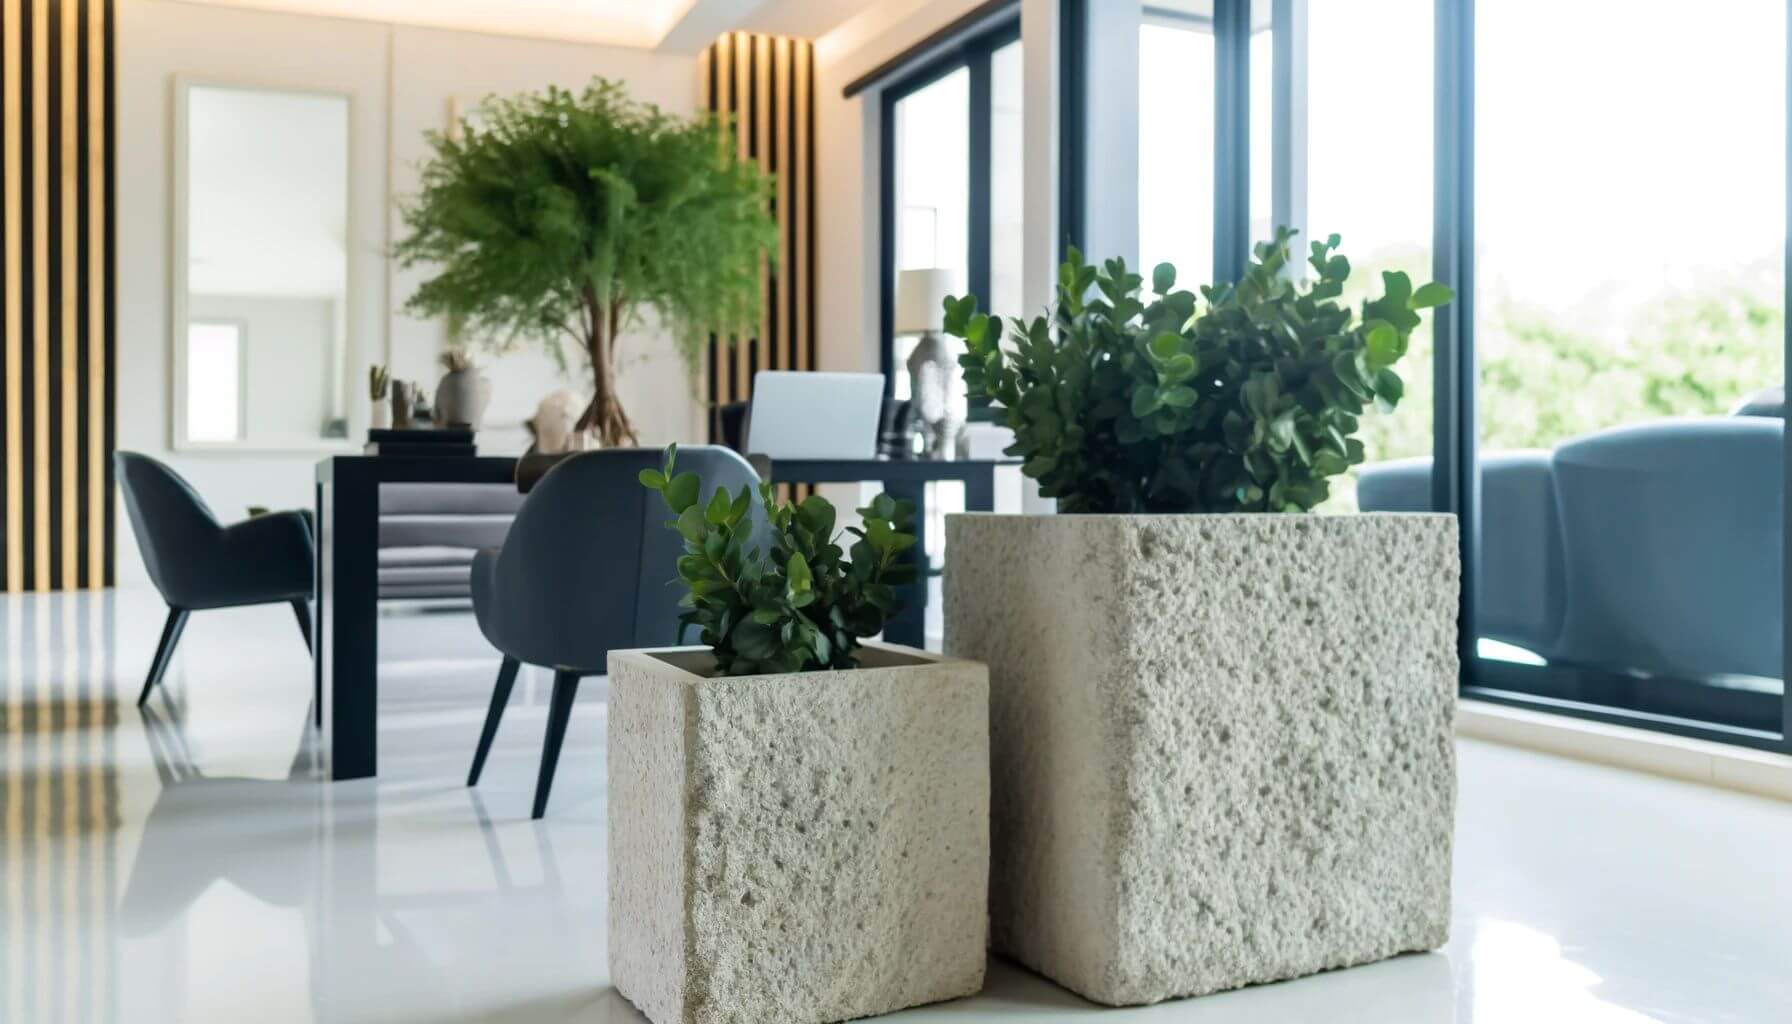 Masonry Planters for Bringing Nature into Your Home Office